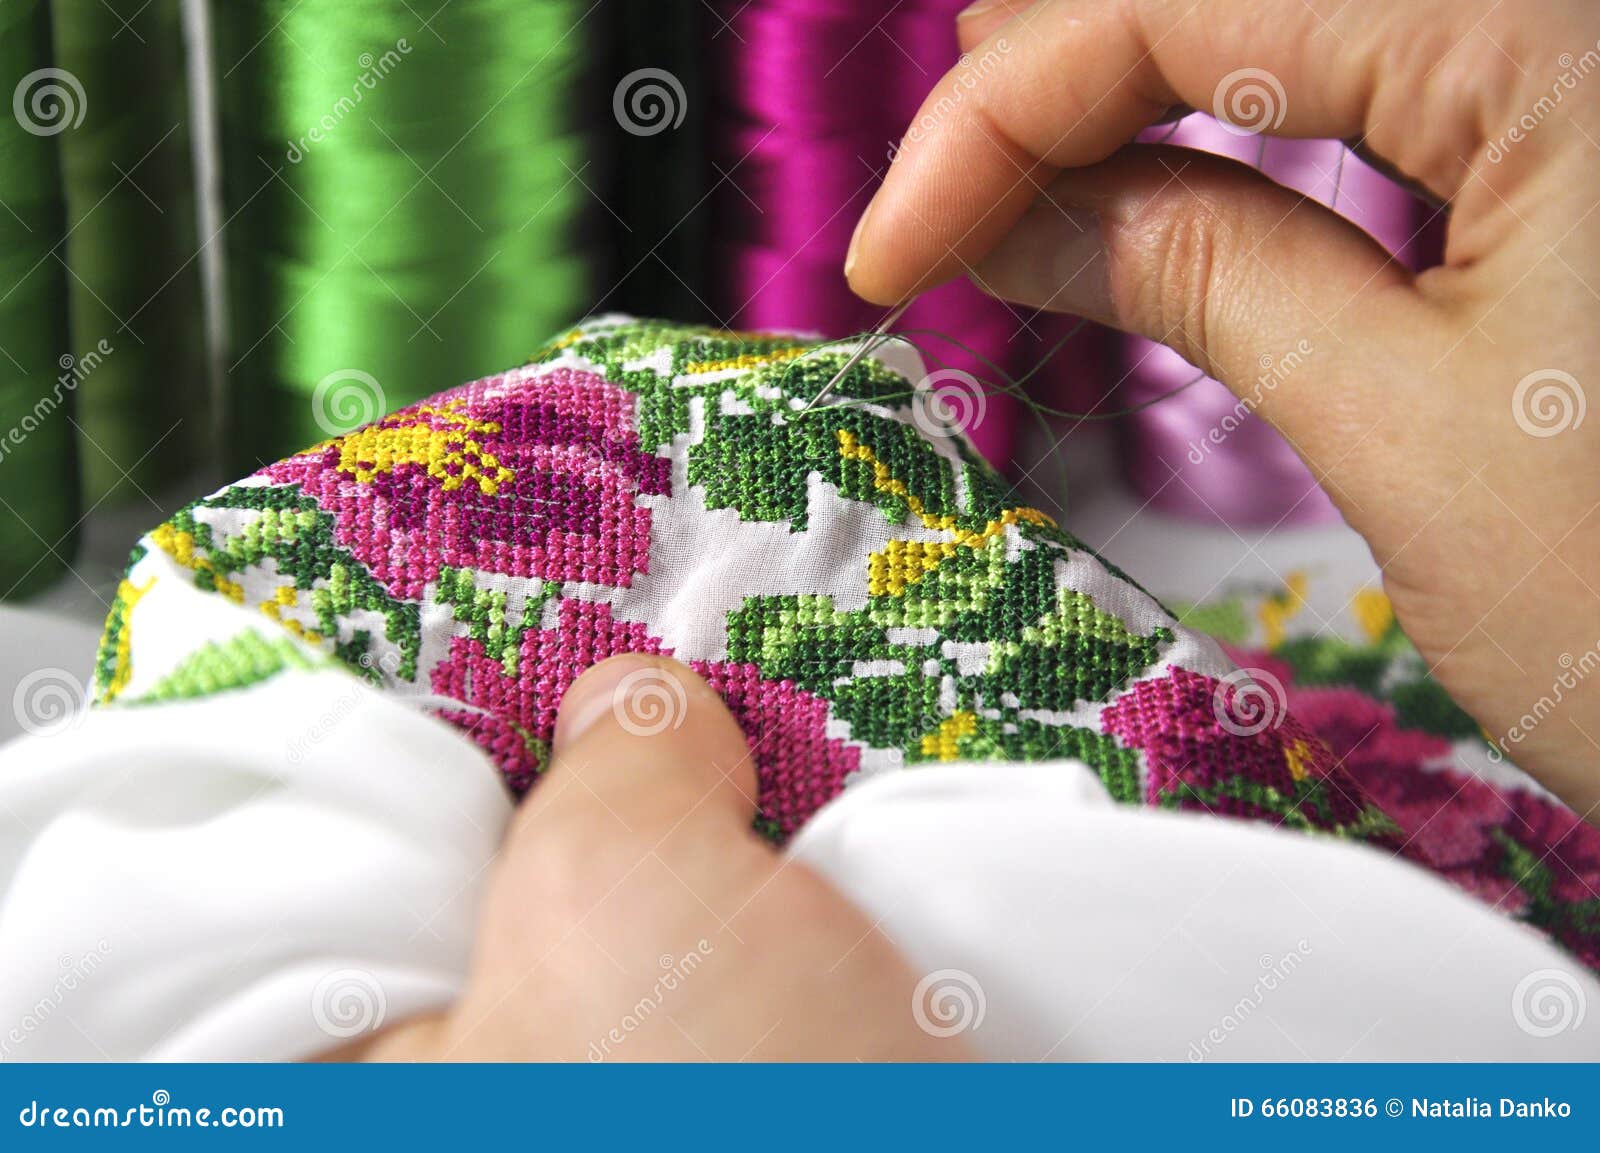 Hand embroidery ornament stock photo. Image of cross - 66083836